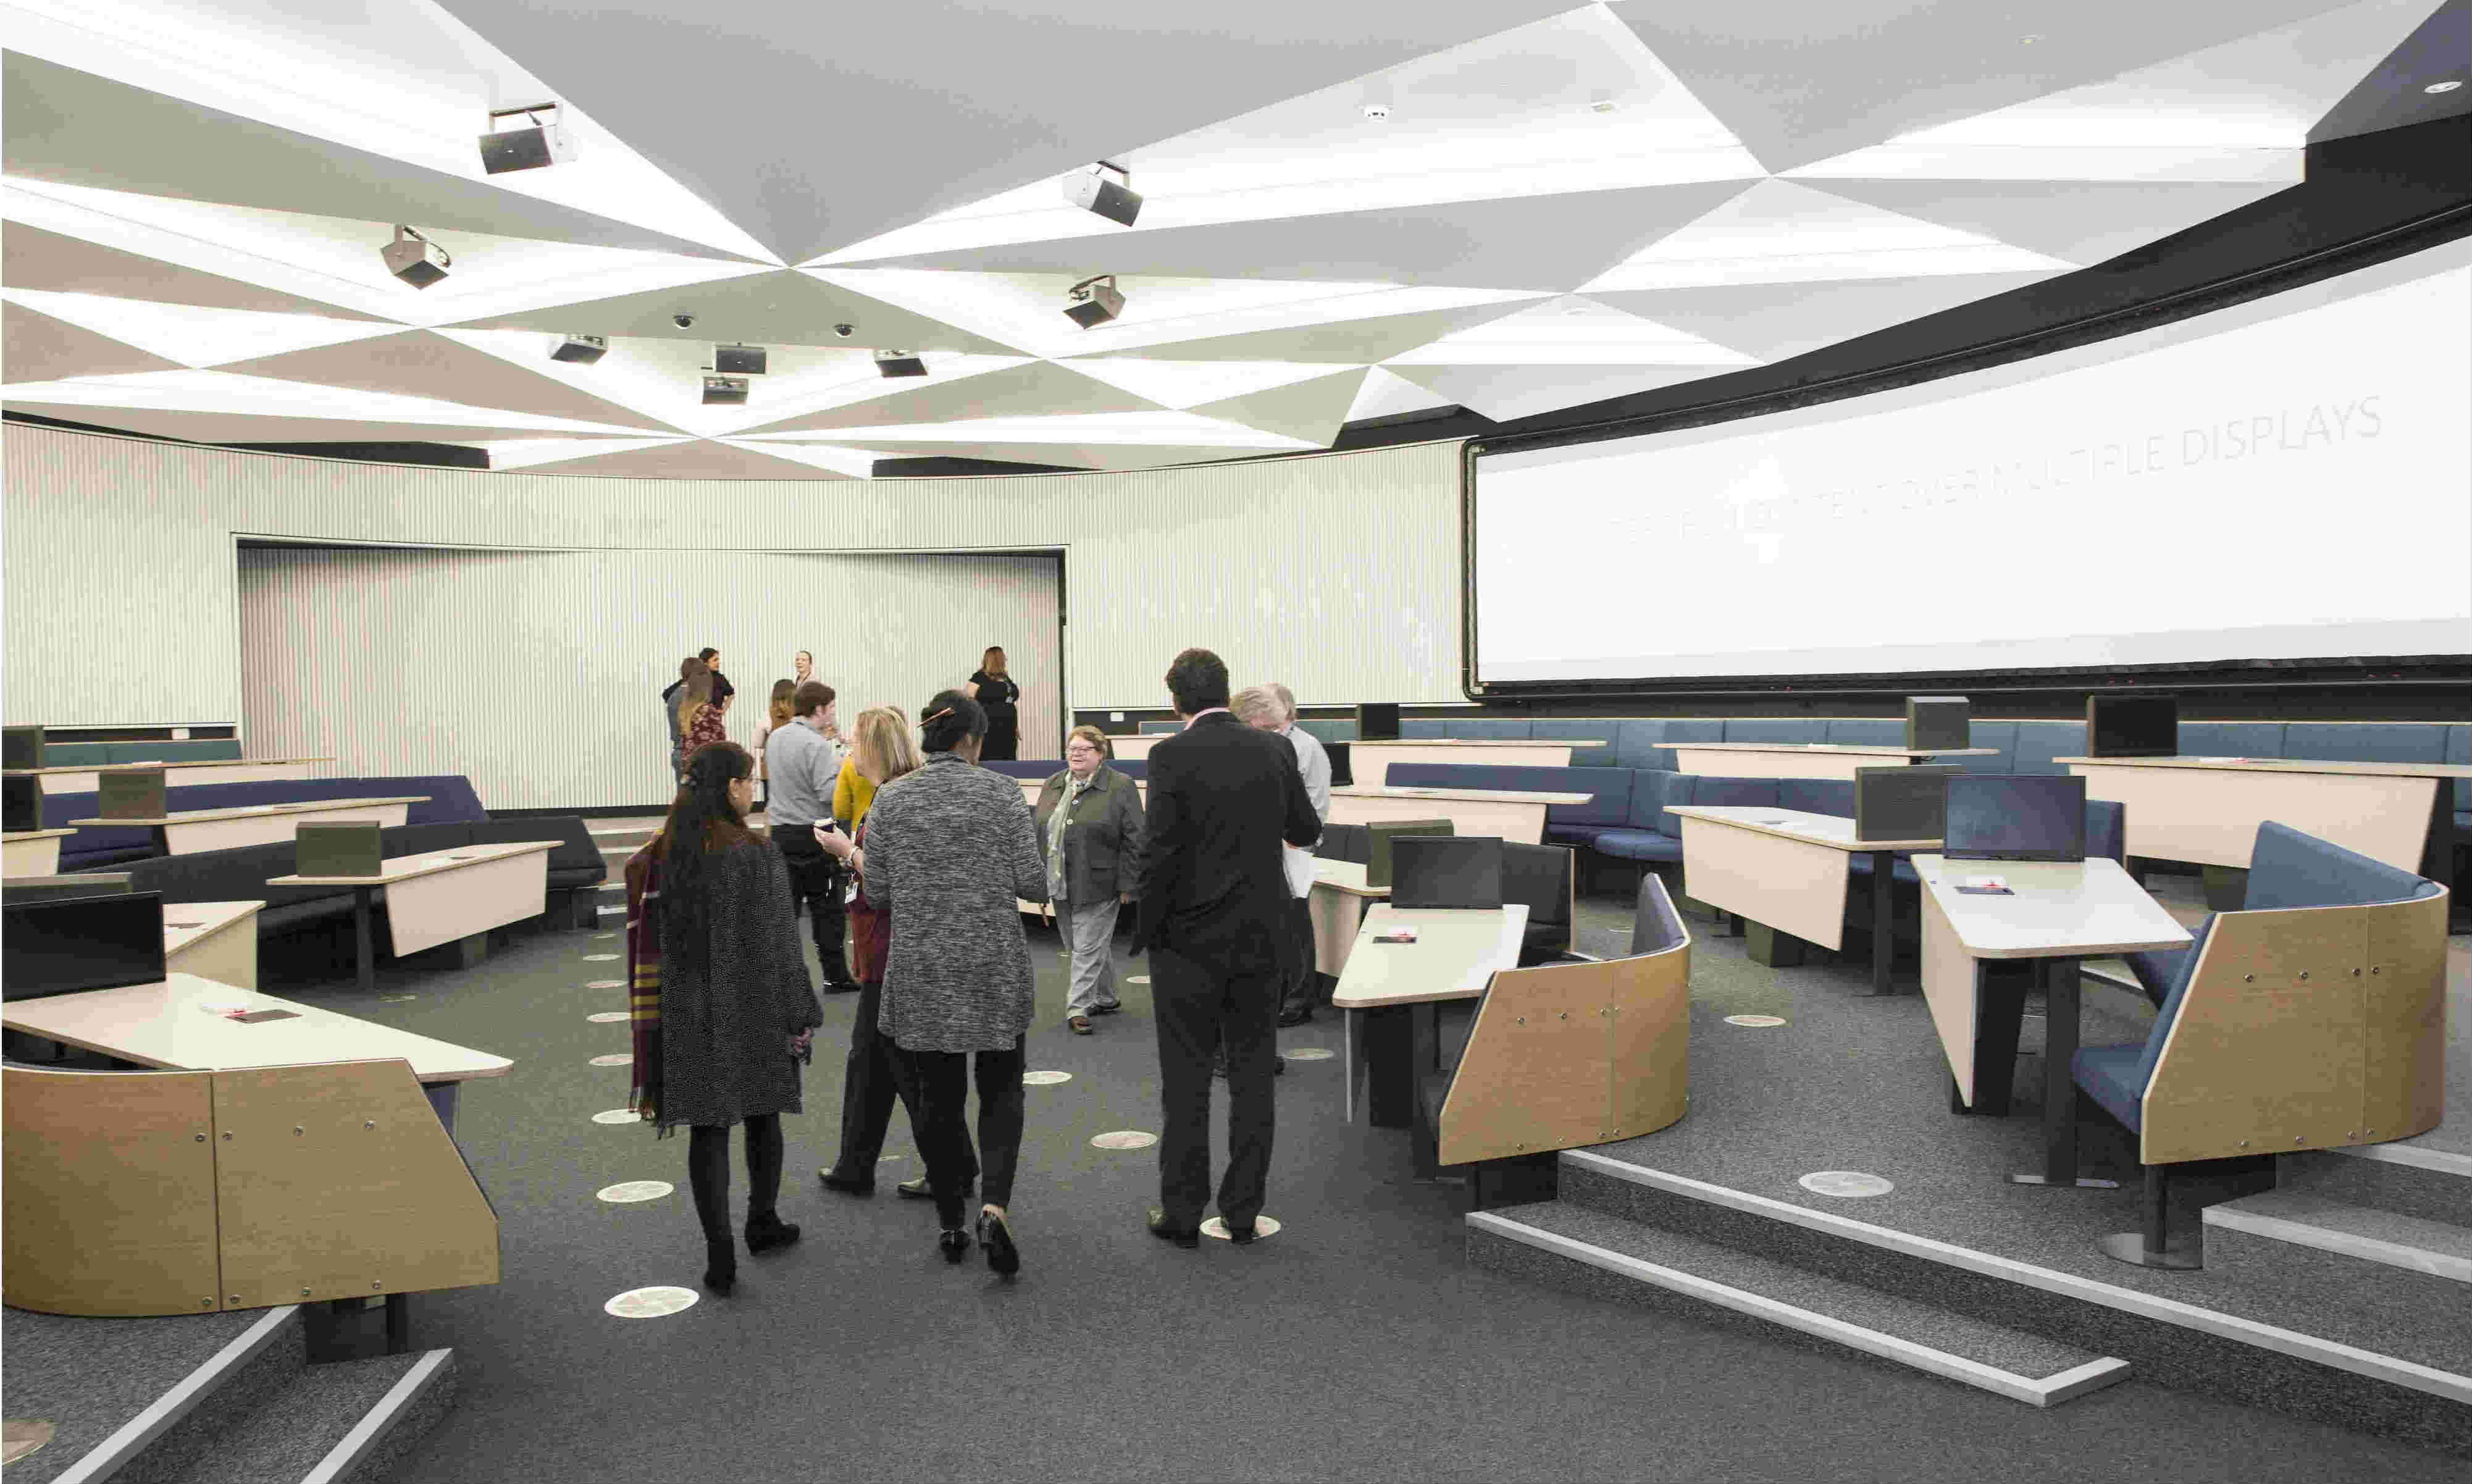 New education hub provides learning spaces for thousands of Birmingham students